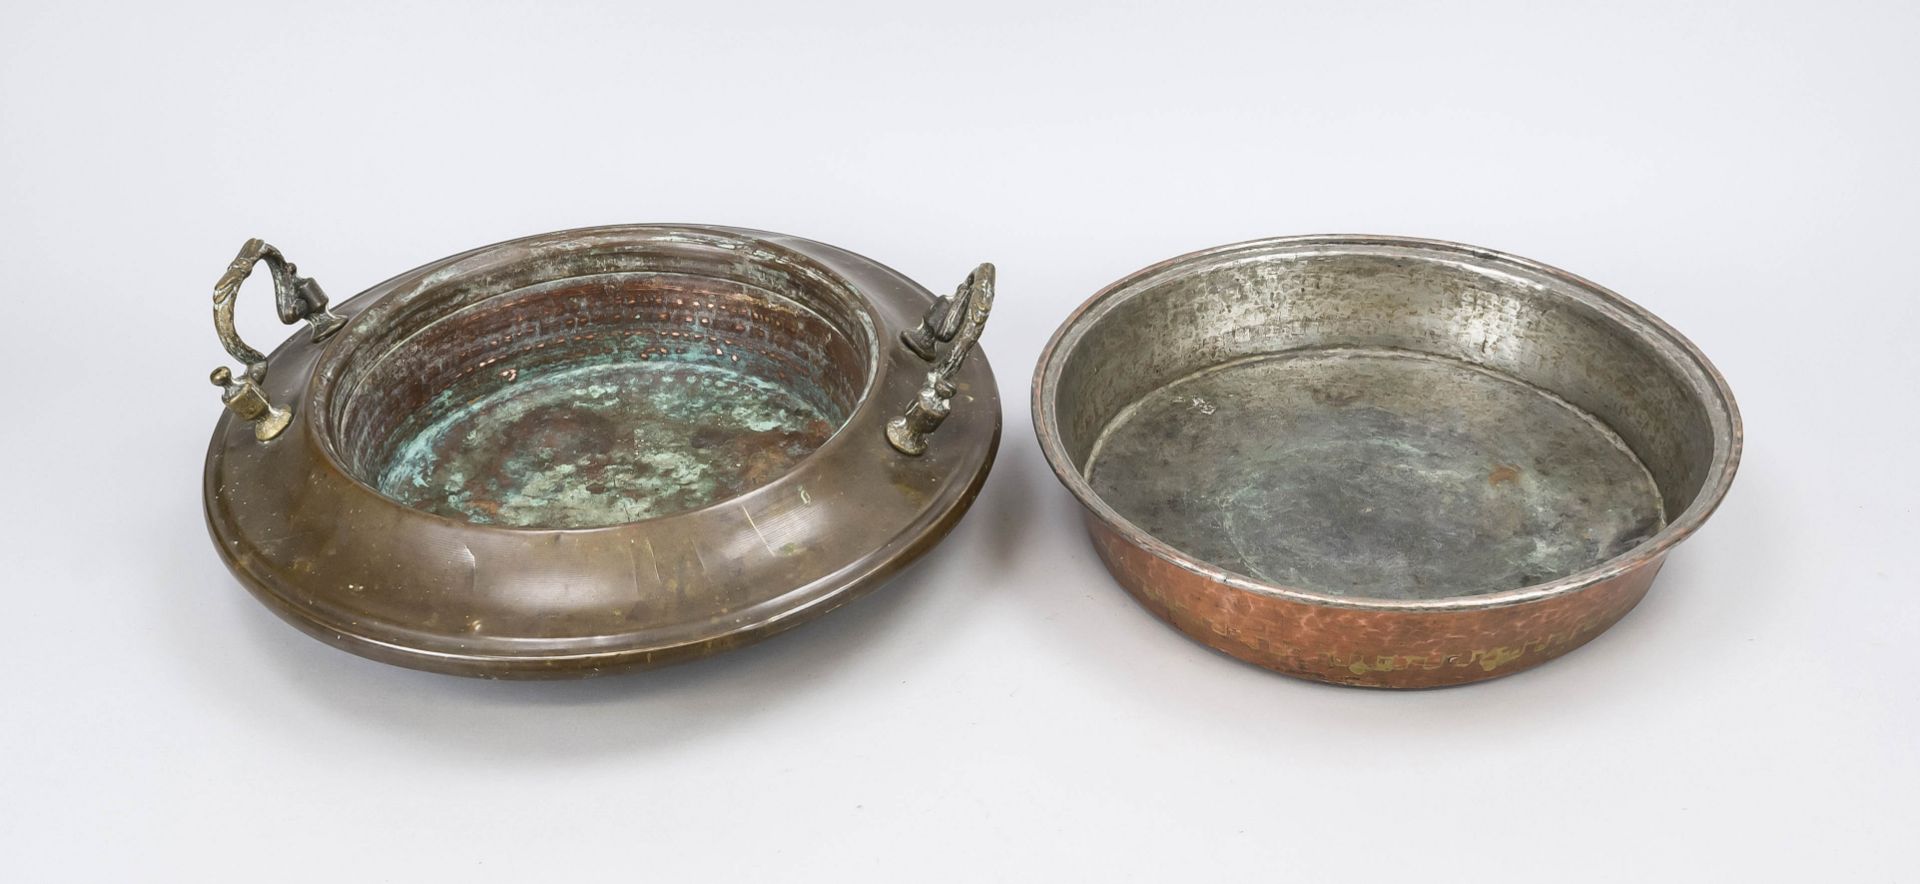 2 copper basins, 18th/19th century, 1 x with handles, rubbed and chipped, d. up to 44 cm